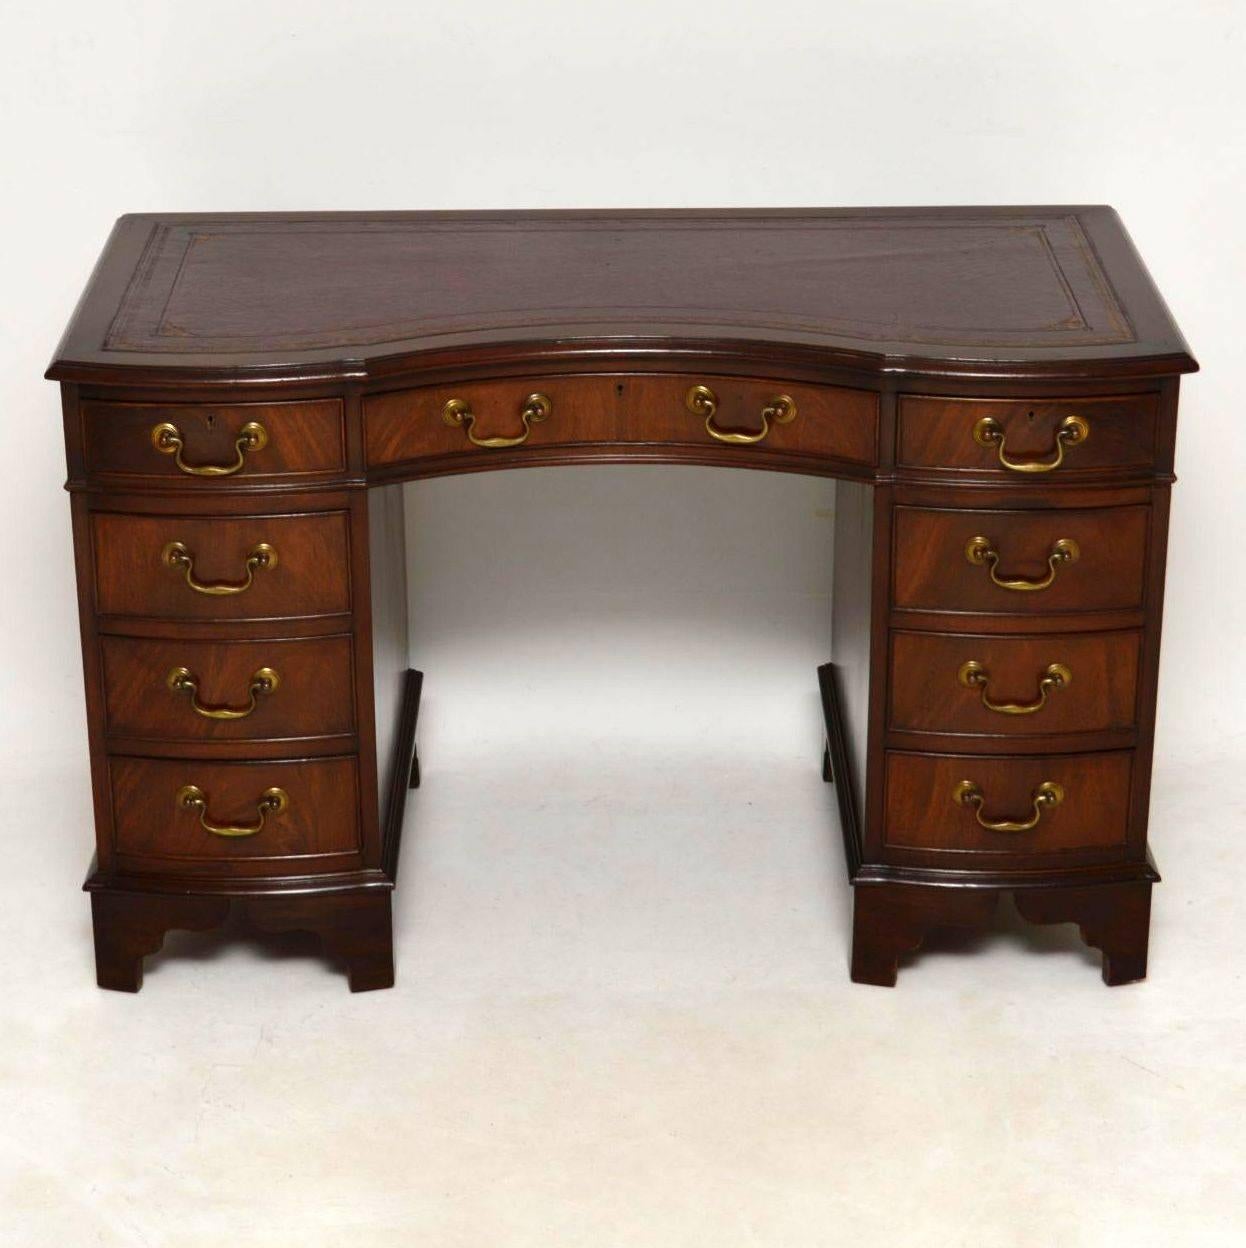 Antique mahogany leather top pedestal desk in lovely condition & with plenty of character. Although this desk isn’t particularly large, it still has a generous knee-hole space, because the drawer sections aren’t too wide. The pedestals are bow